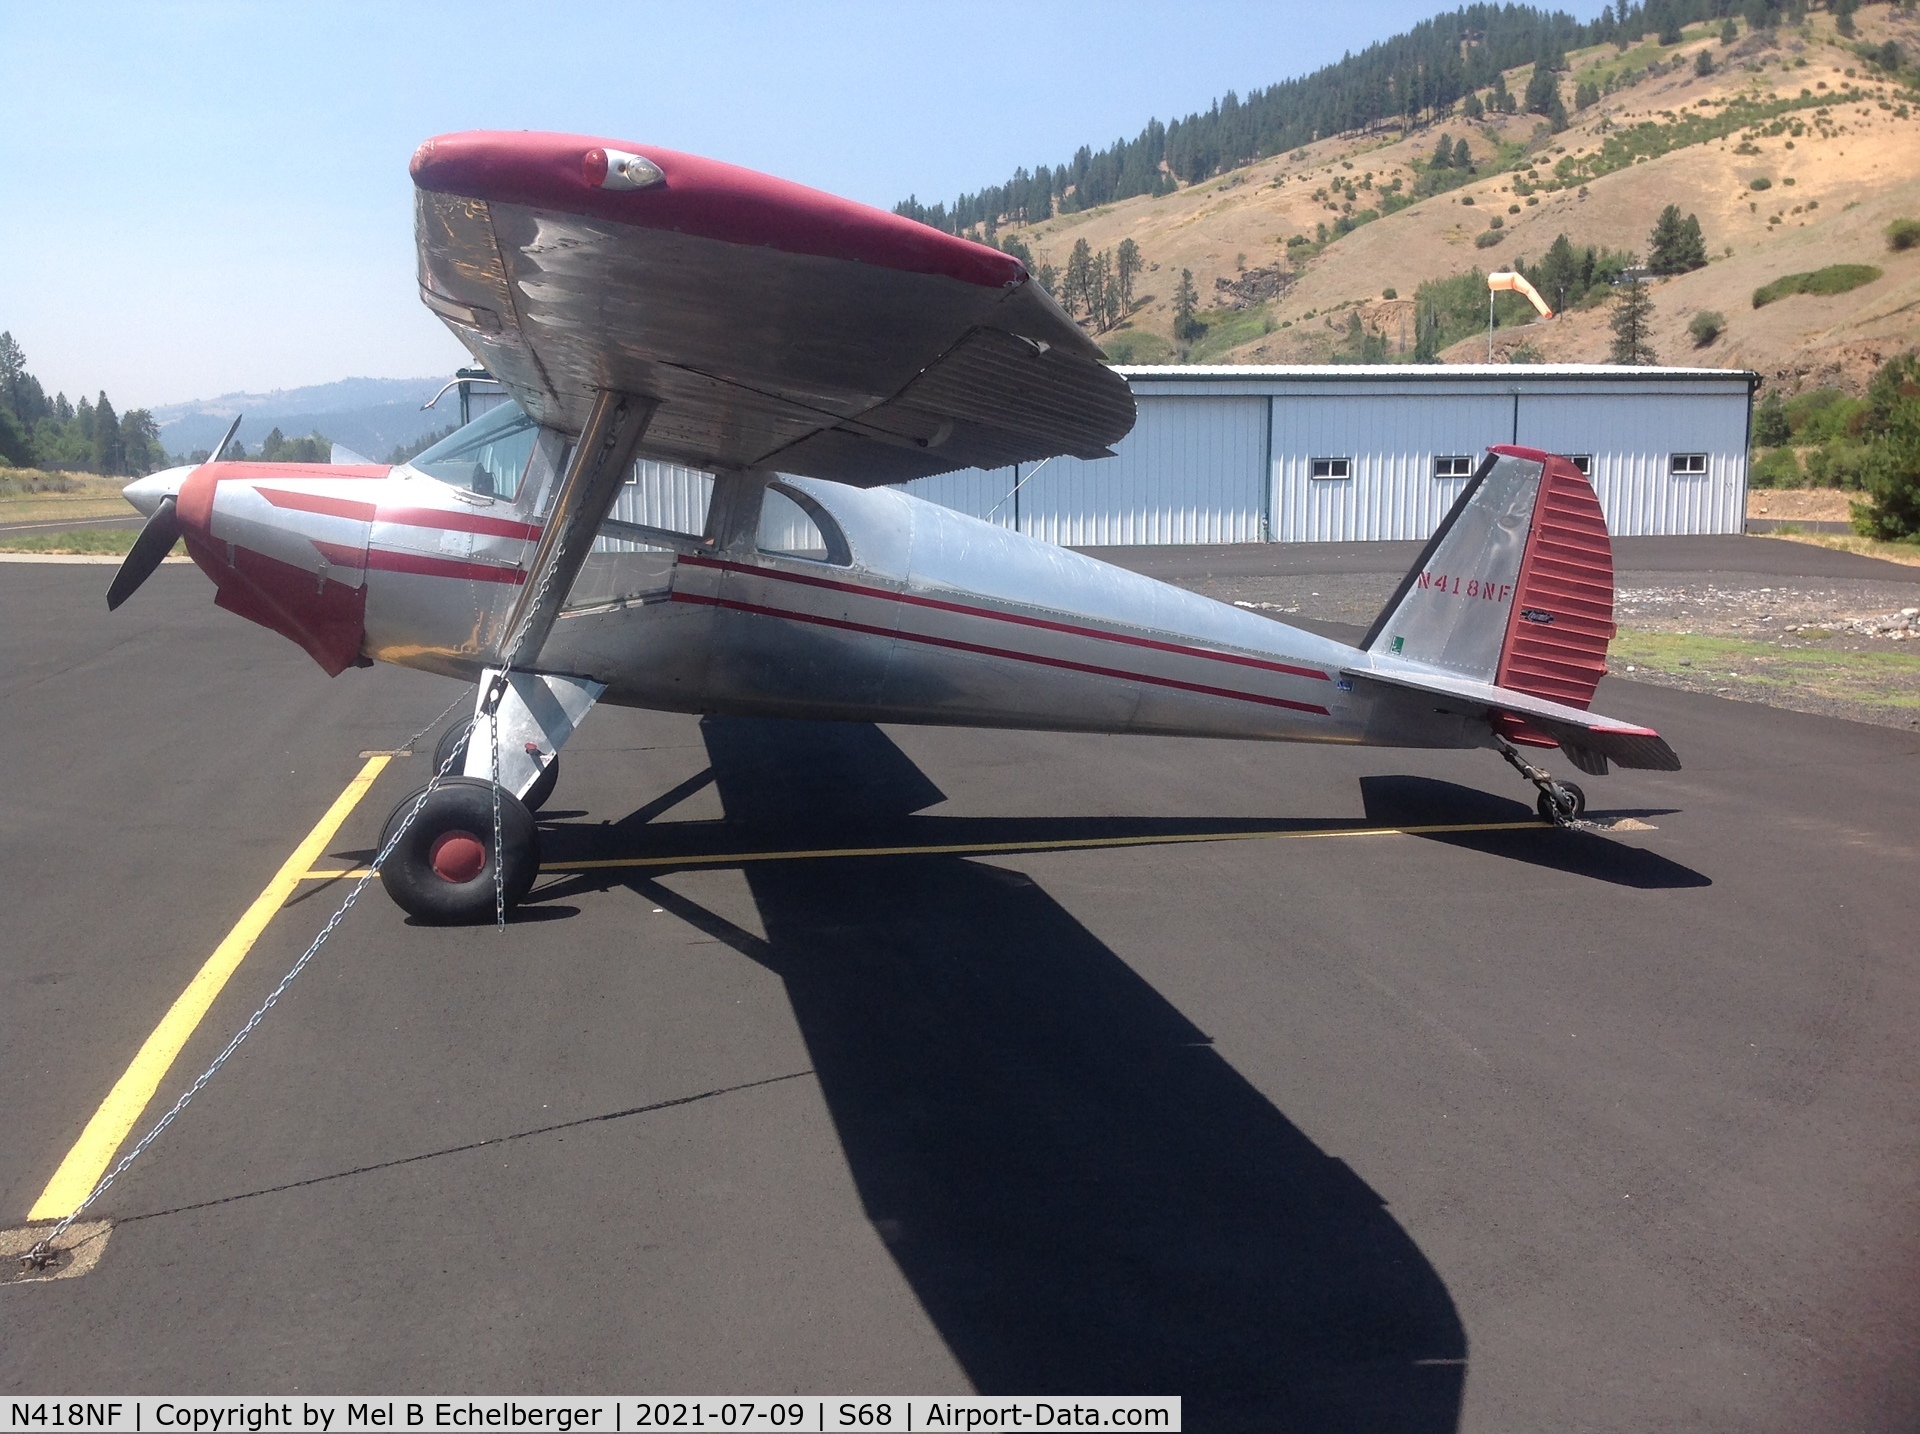 N418NF, Luscombe 8E Silvaire C/N 5117, Parked at Orofino Idaho